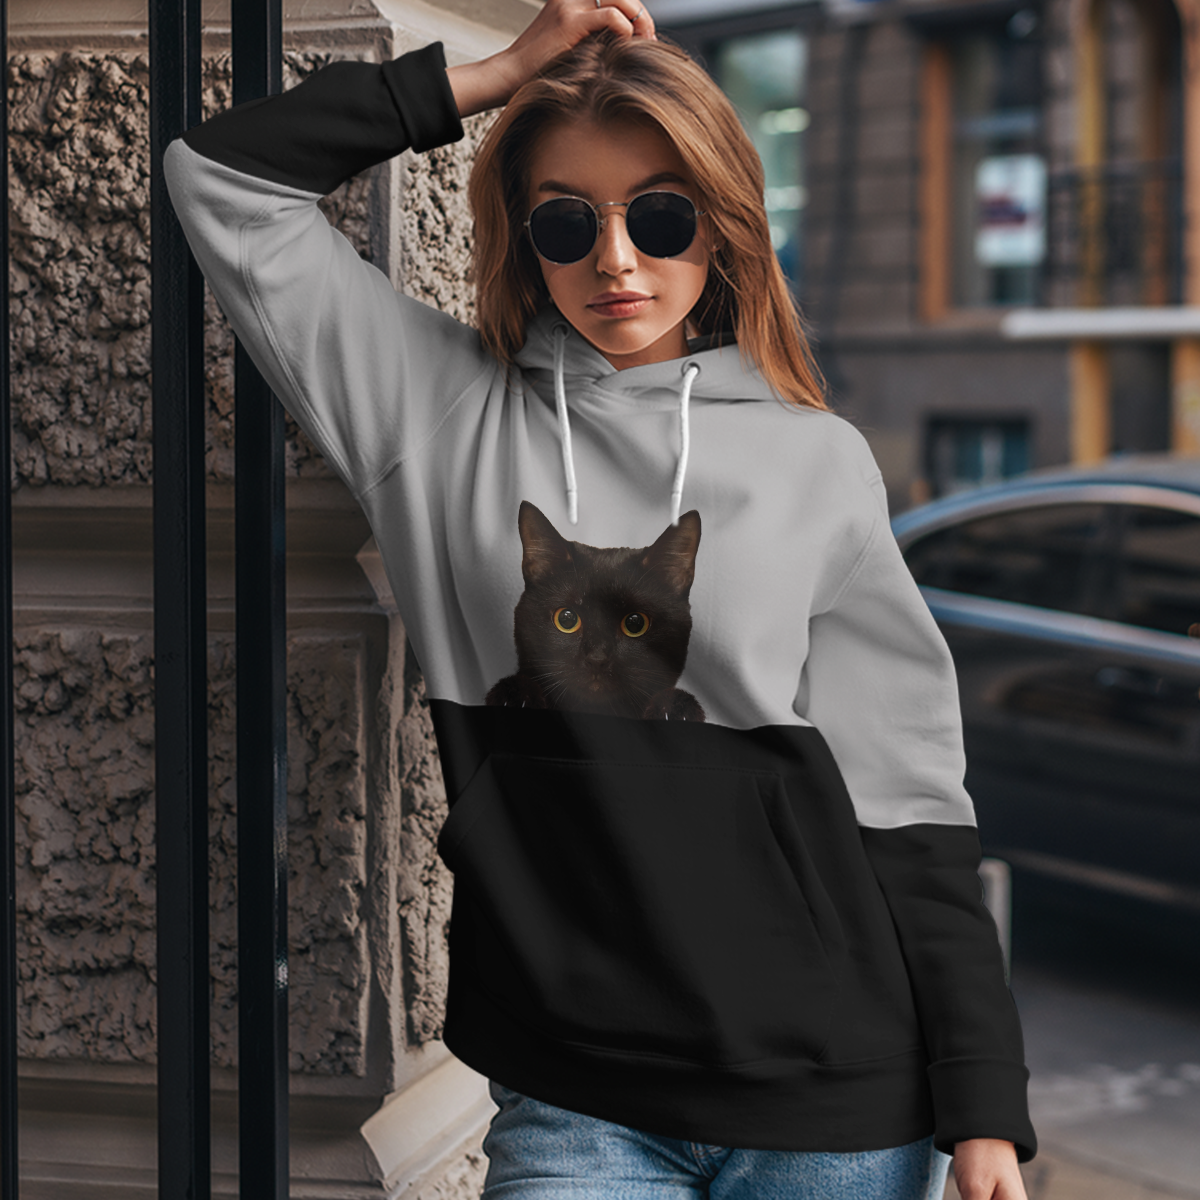 Can You See Me - Bombay Cat Hoodie V1